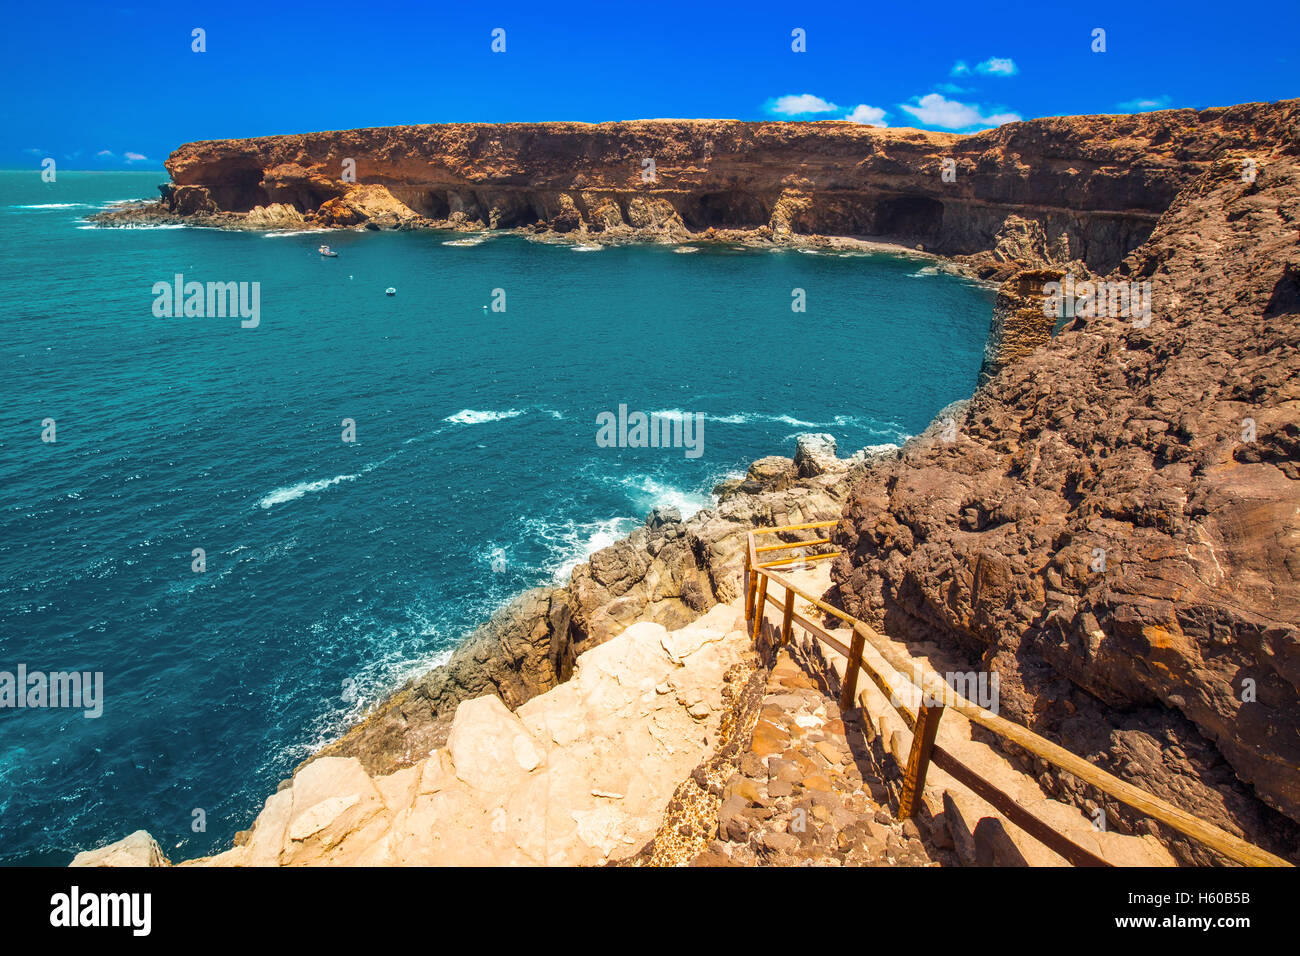 View to Ajuy coastline with vulcanic mountains on Fuerteventura island, Canary Islands, Spain. Stock Photo